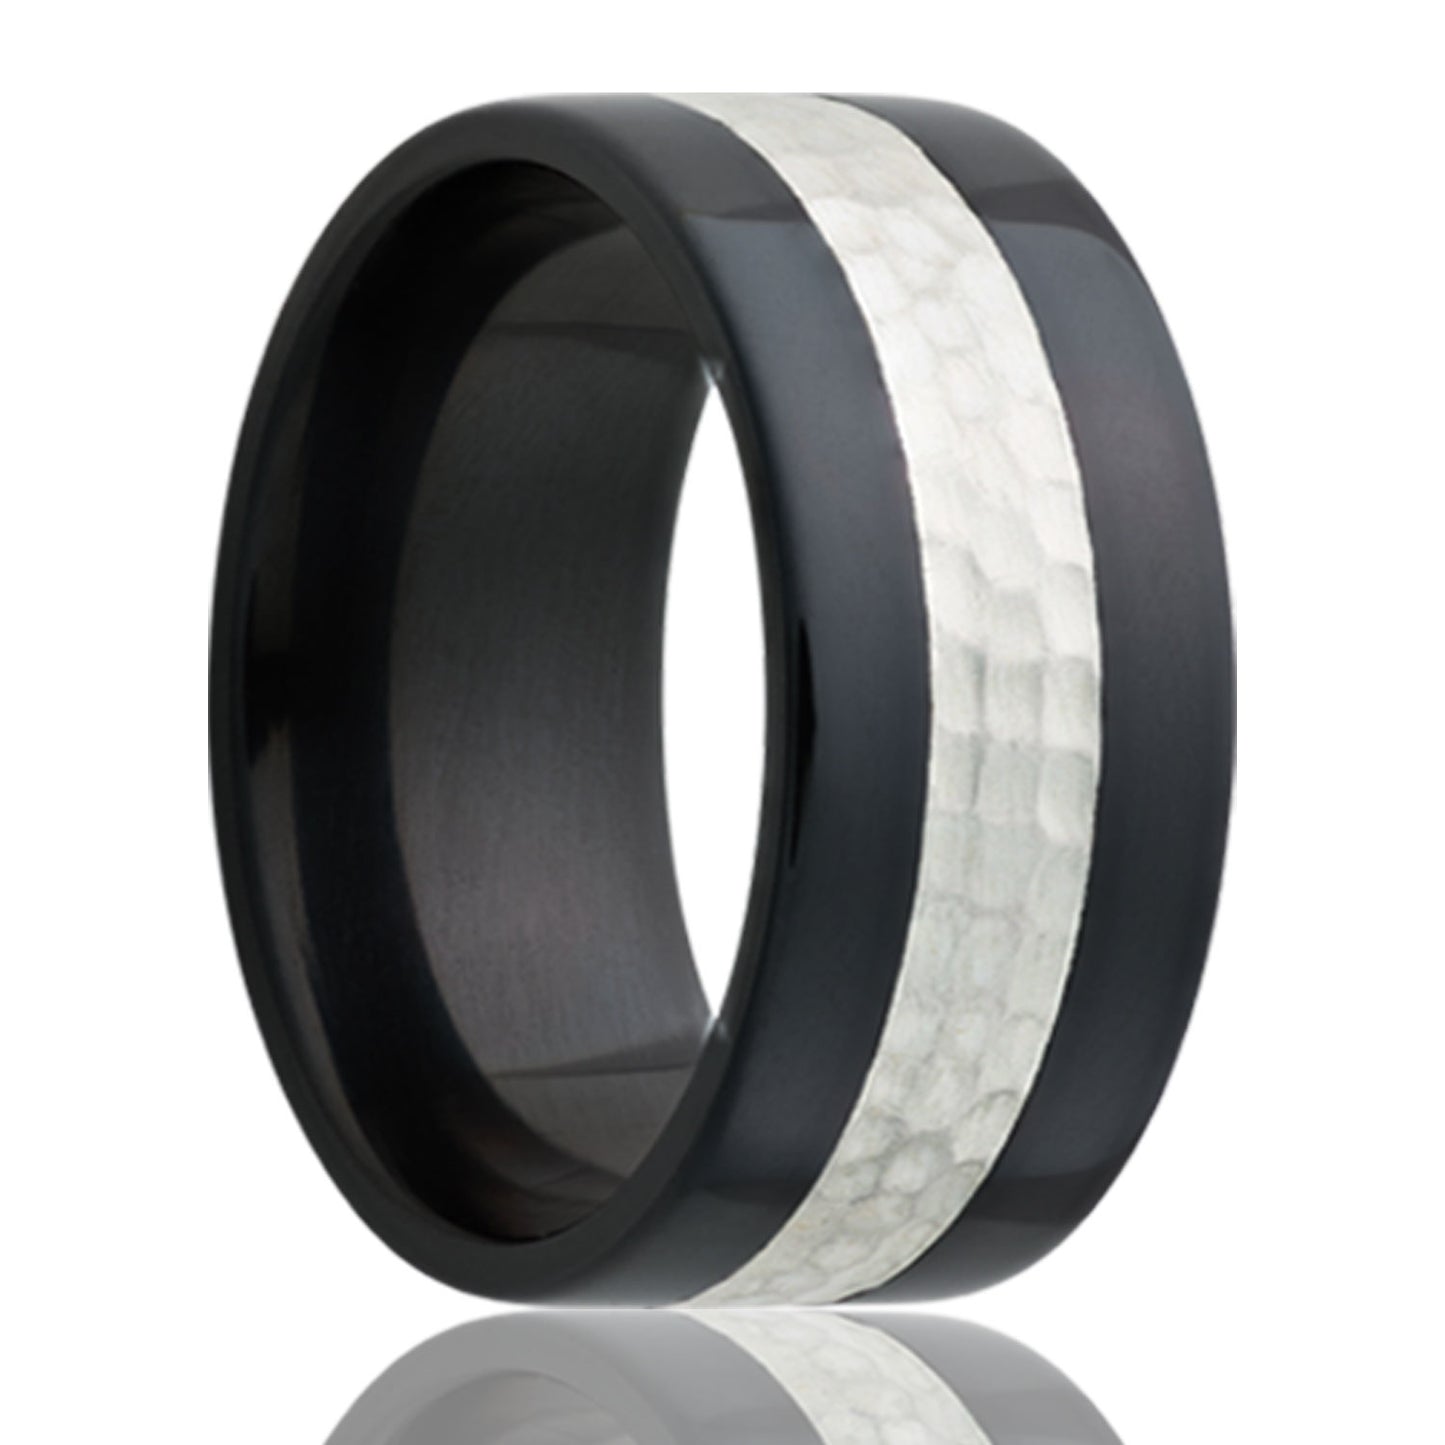 A hammered sterling silver inlay zirconium men's wedding band displayed on a neutral white background.